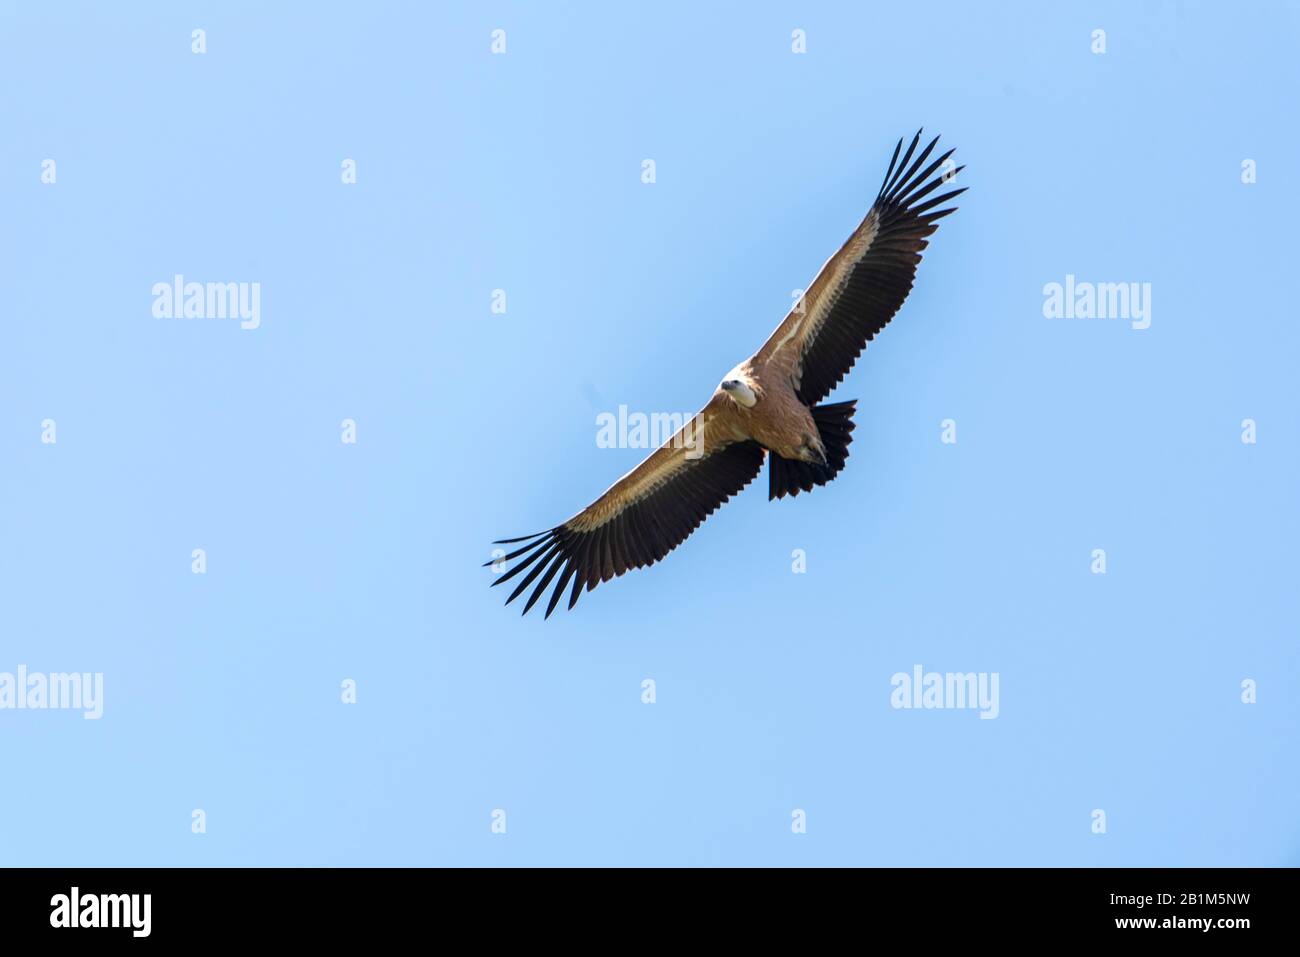 Large Bird Griffon Vulture Flying High In The Sky Stock Photo - Alamy